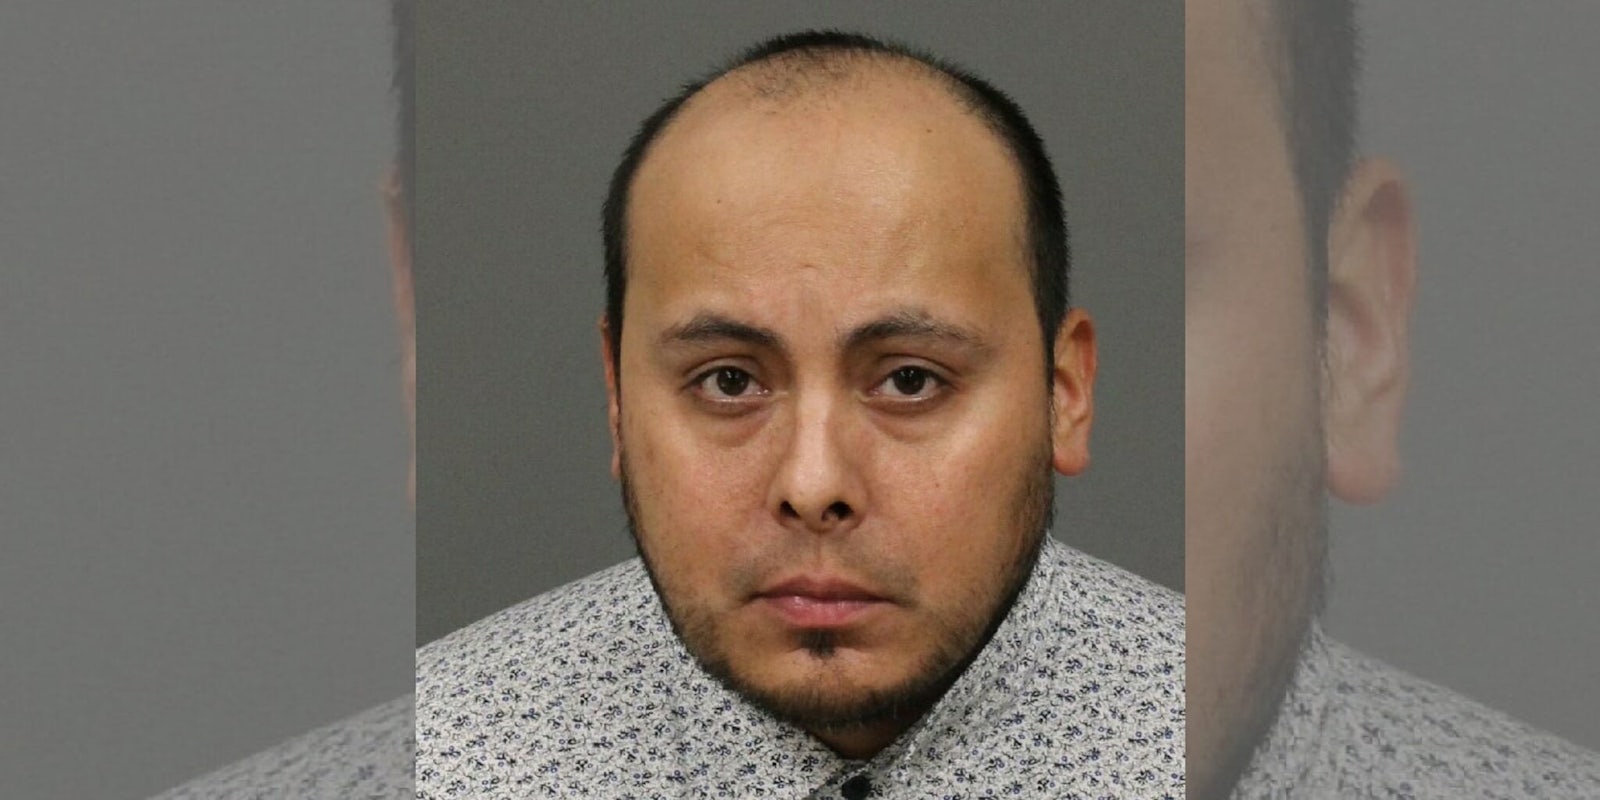 Uber driver Alfonso Alarcon-Nunez has been charged with raping, assaulting, and robbing four women.